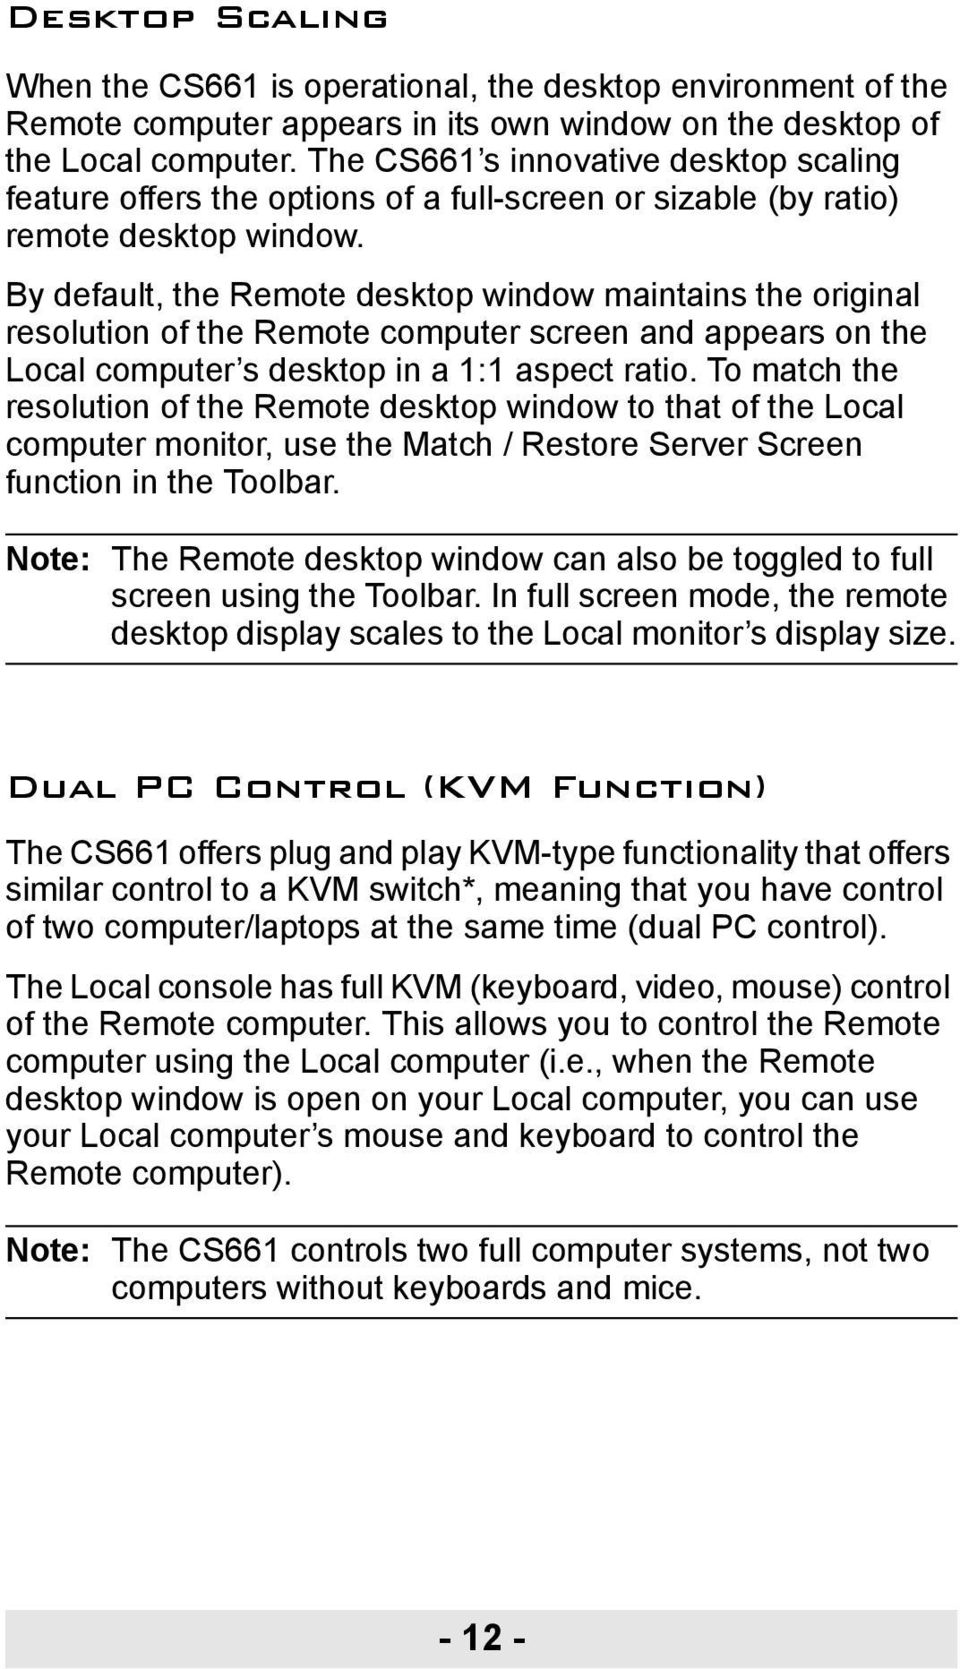 By default, the Remote desktop window maintains the original resolution of the Remote computer screen and appears on the Local computer s desktop in a 1:1 aspect ratio.